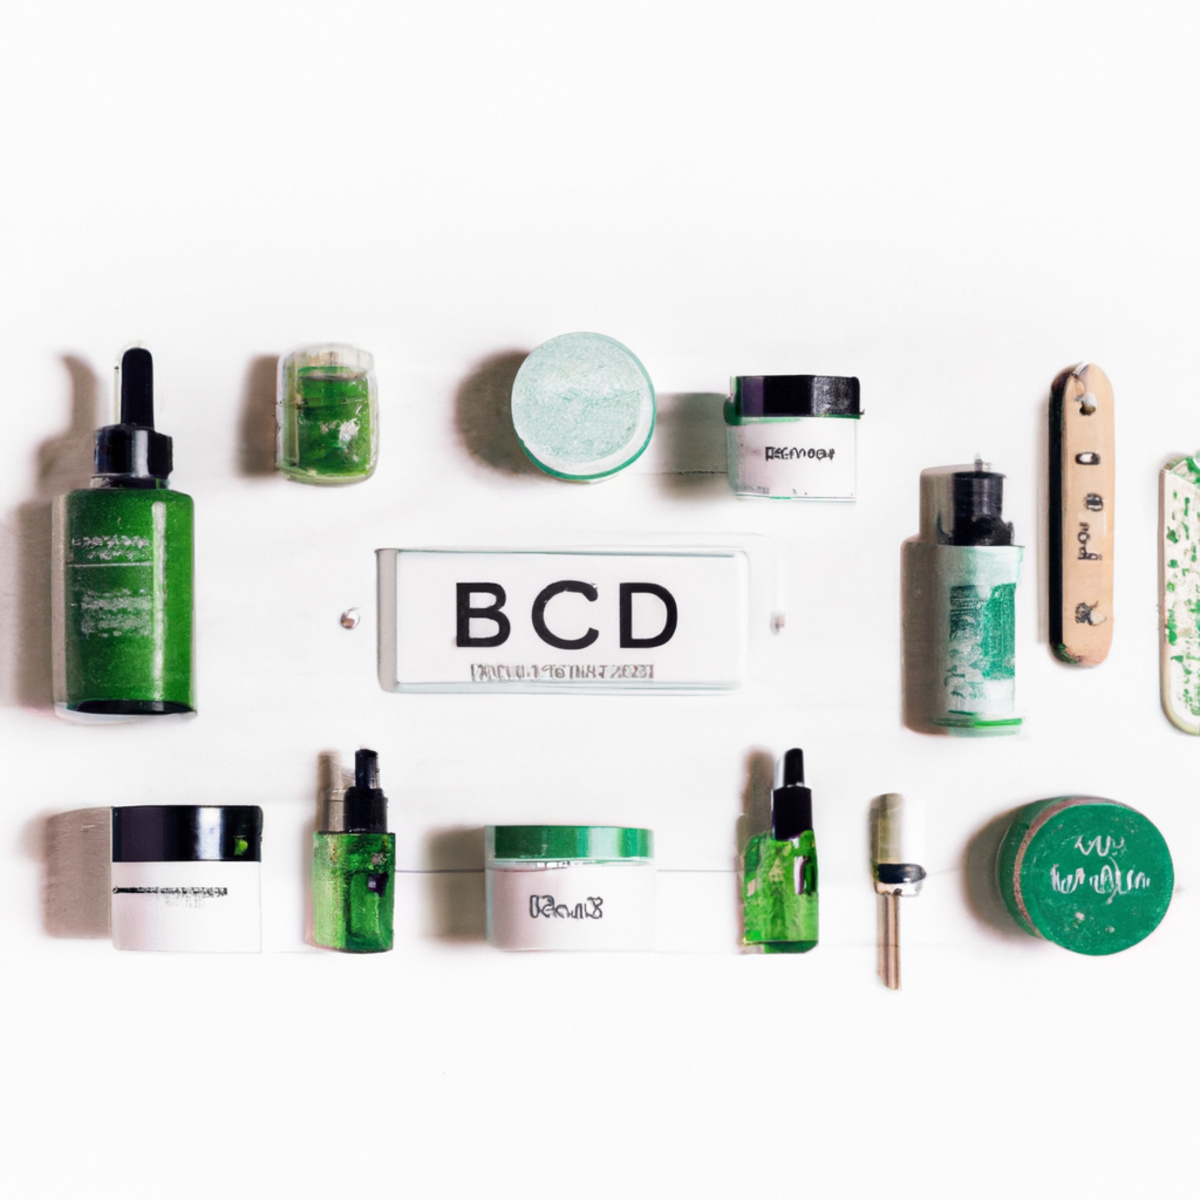 Get ready to glow with these CBD-infused natural skin care routines! From cleanser to spot treatment, this sleek and modern collection has got you covered. And with the added bonus of skincare tools like a jade roller and facial brush, your skin will thank you for the complete pampering experience.